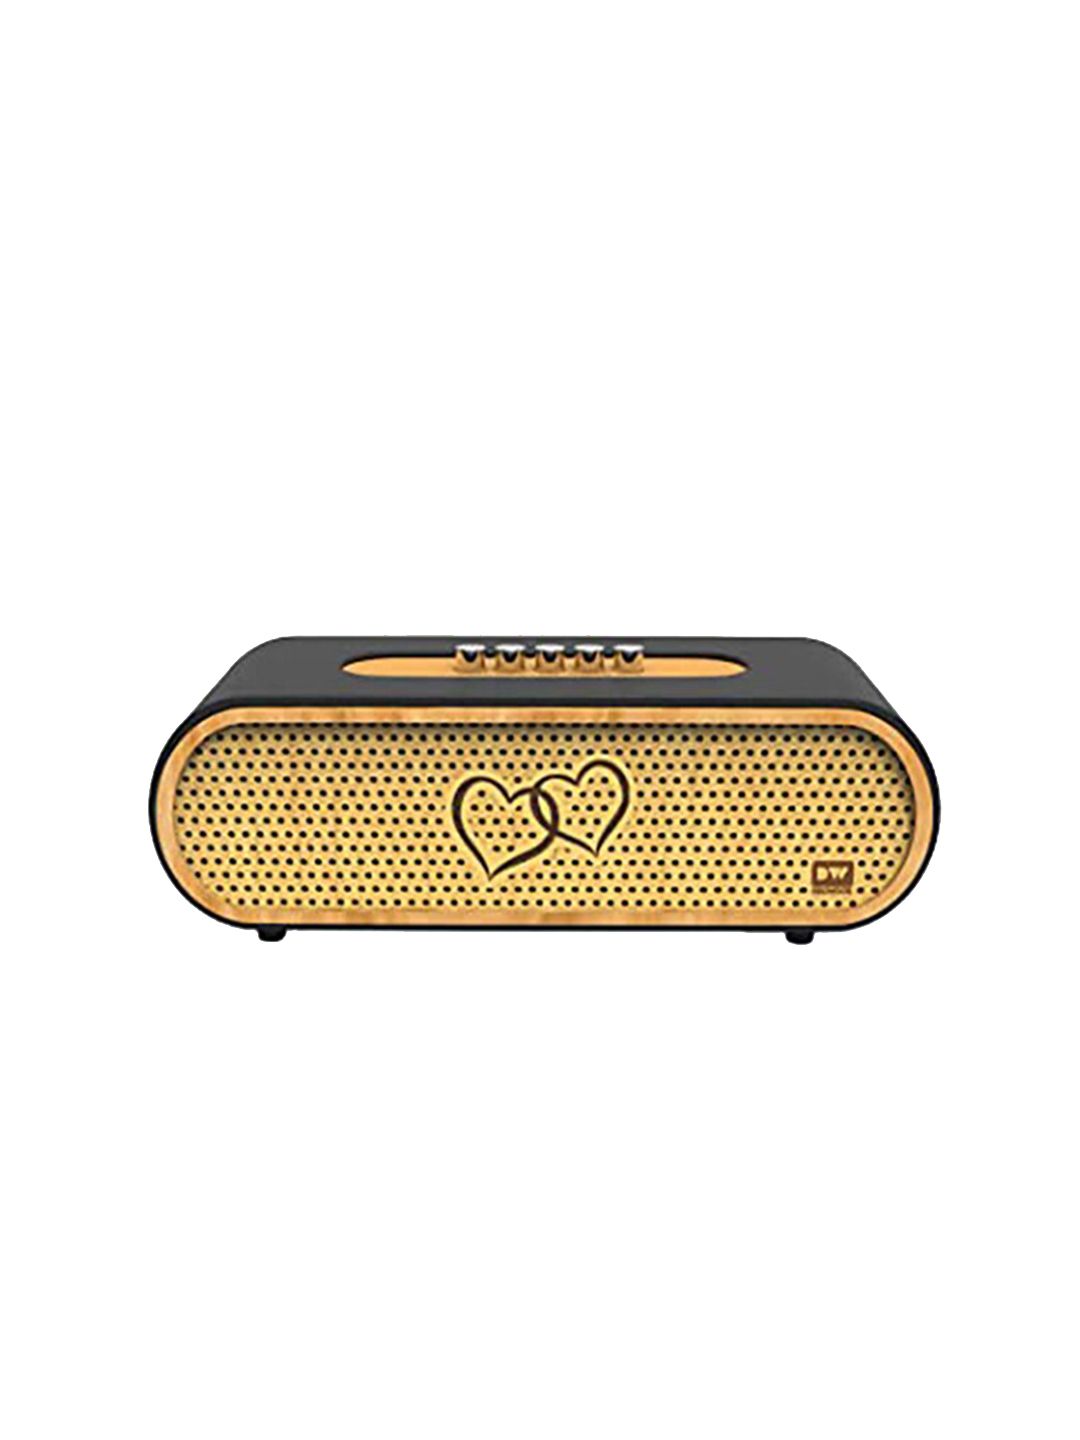 DECIWOOD Black & Yellow Solid Curved 20W Wooden Portable Bluetooth Speaker Price in India